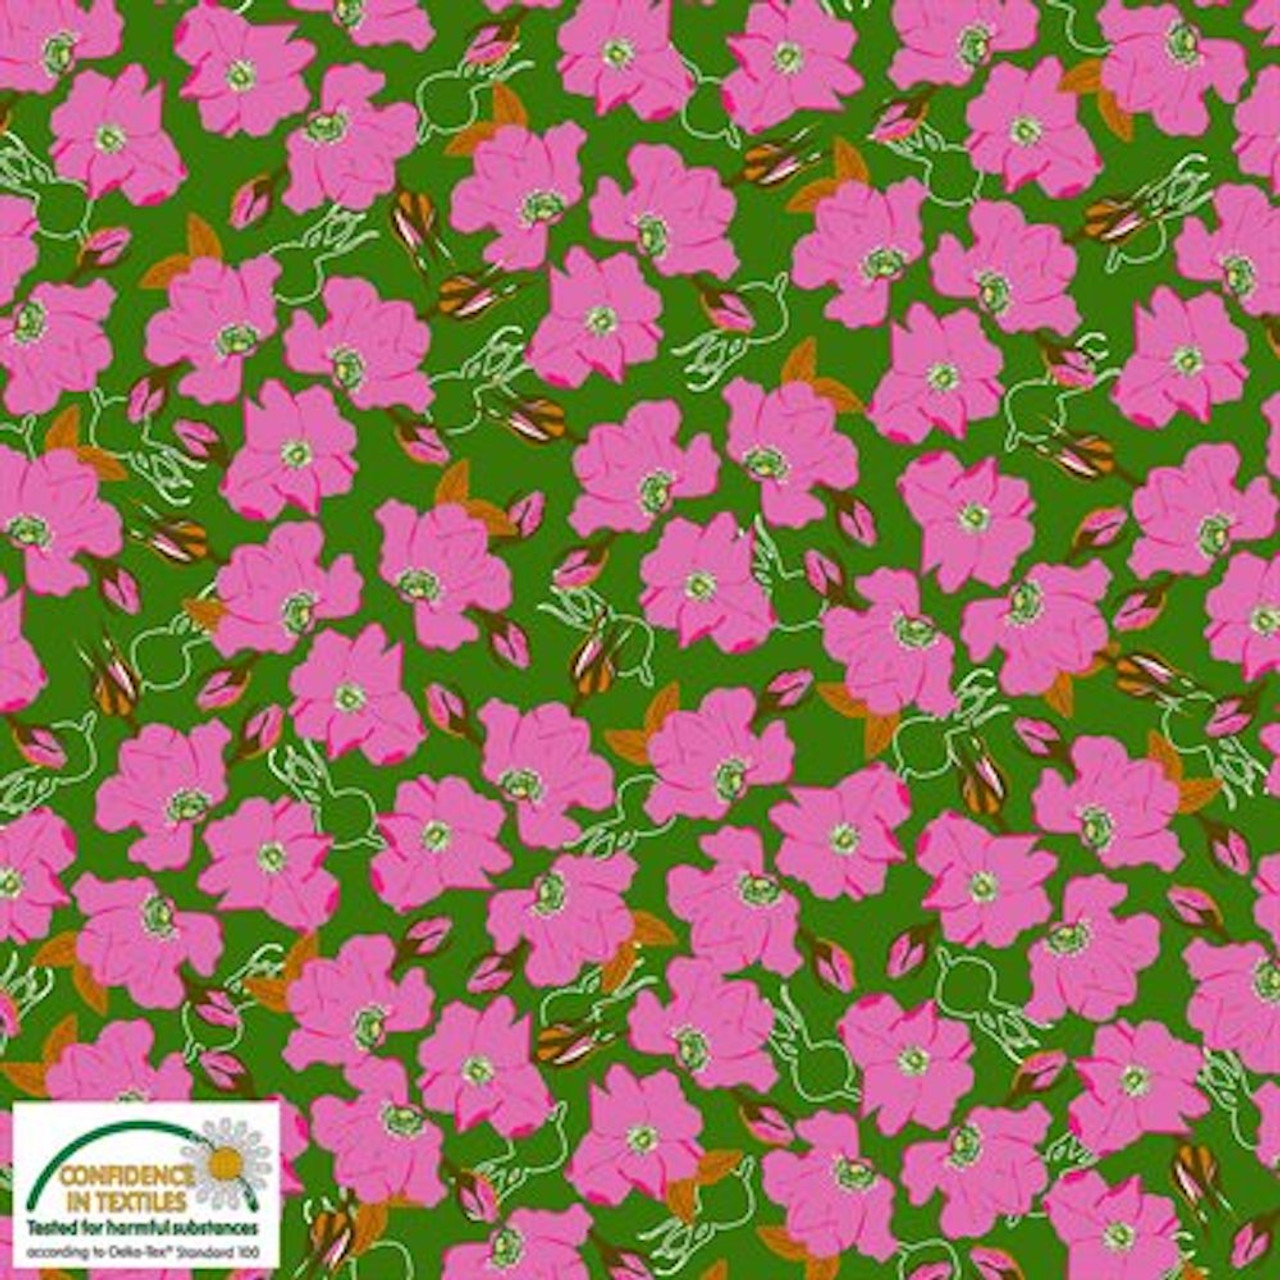 Stof Summer Berries Budding Flowers Green Cotton Fabric By The Yard